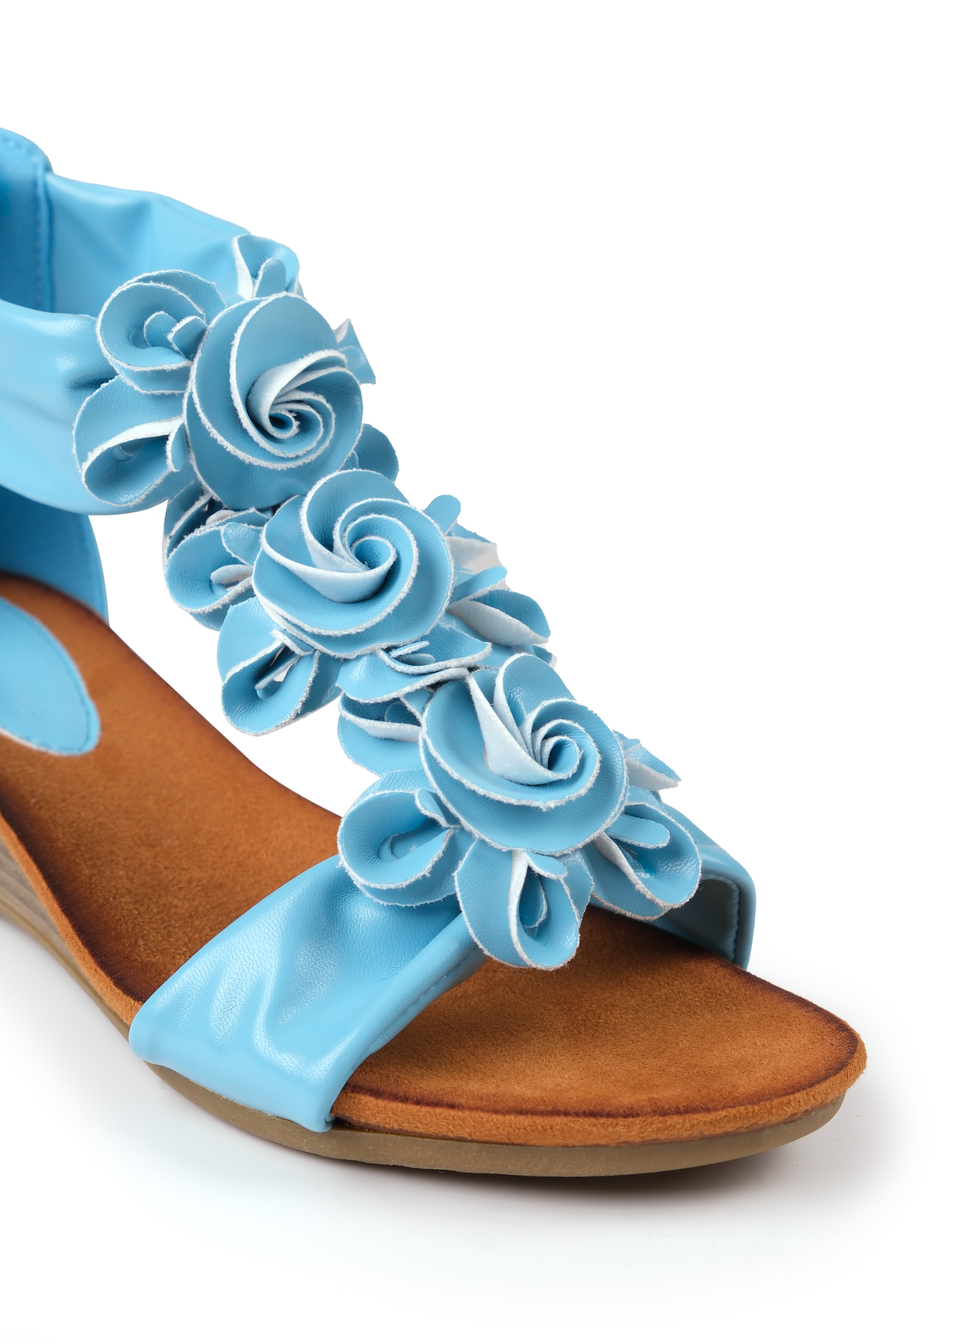 Where's That From Blue Pu Abilene Low Wedge Heel Sandals